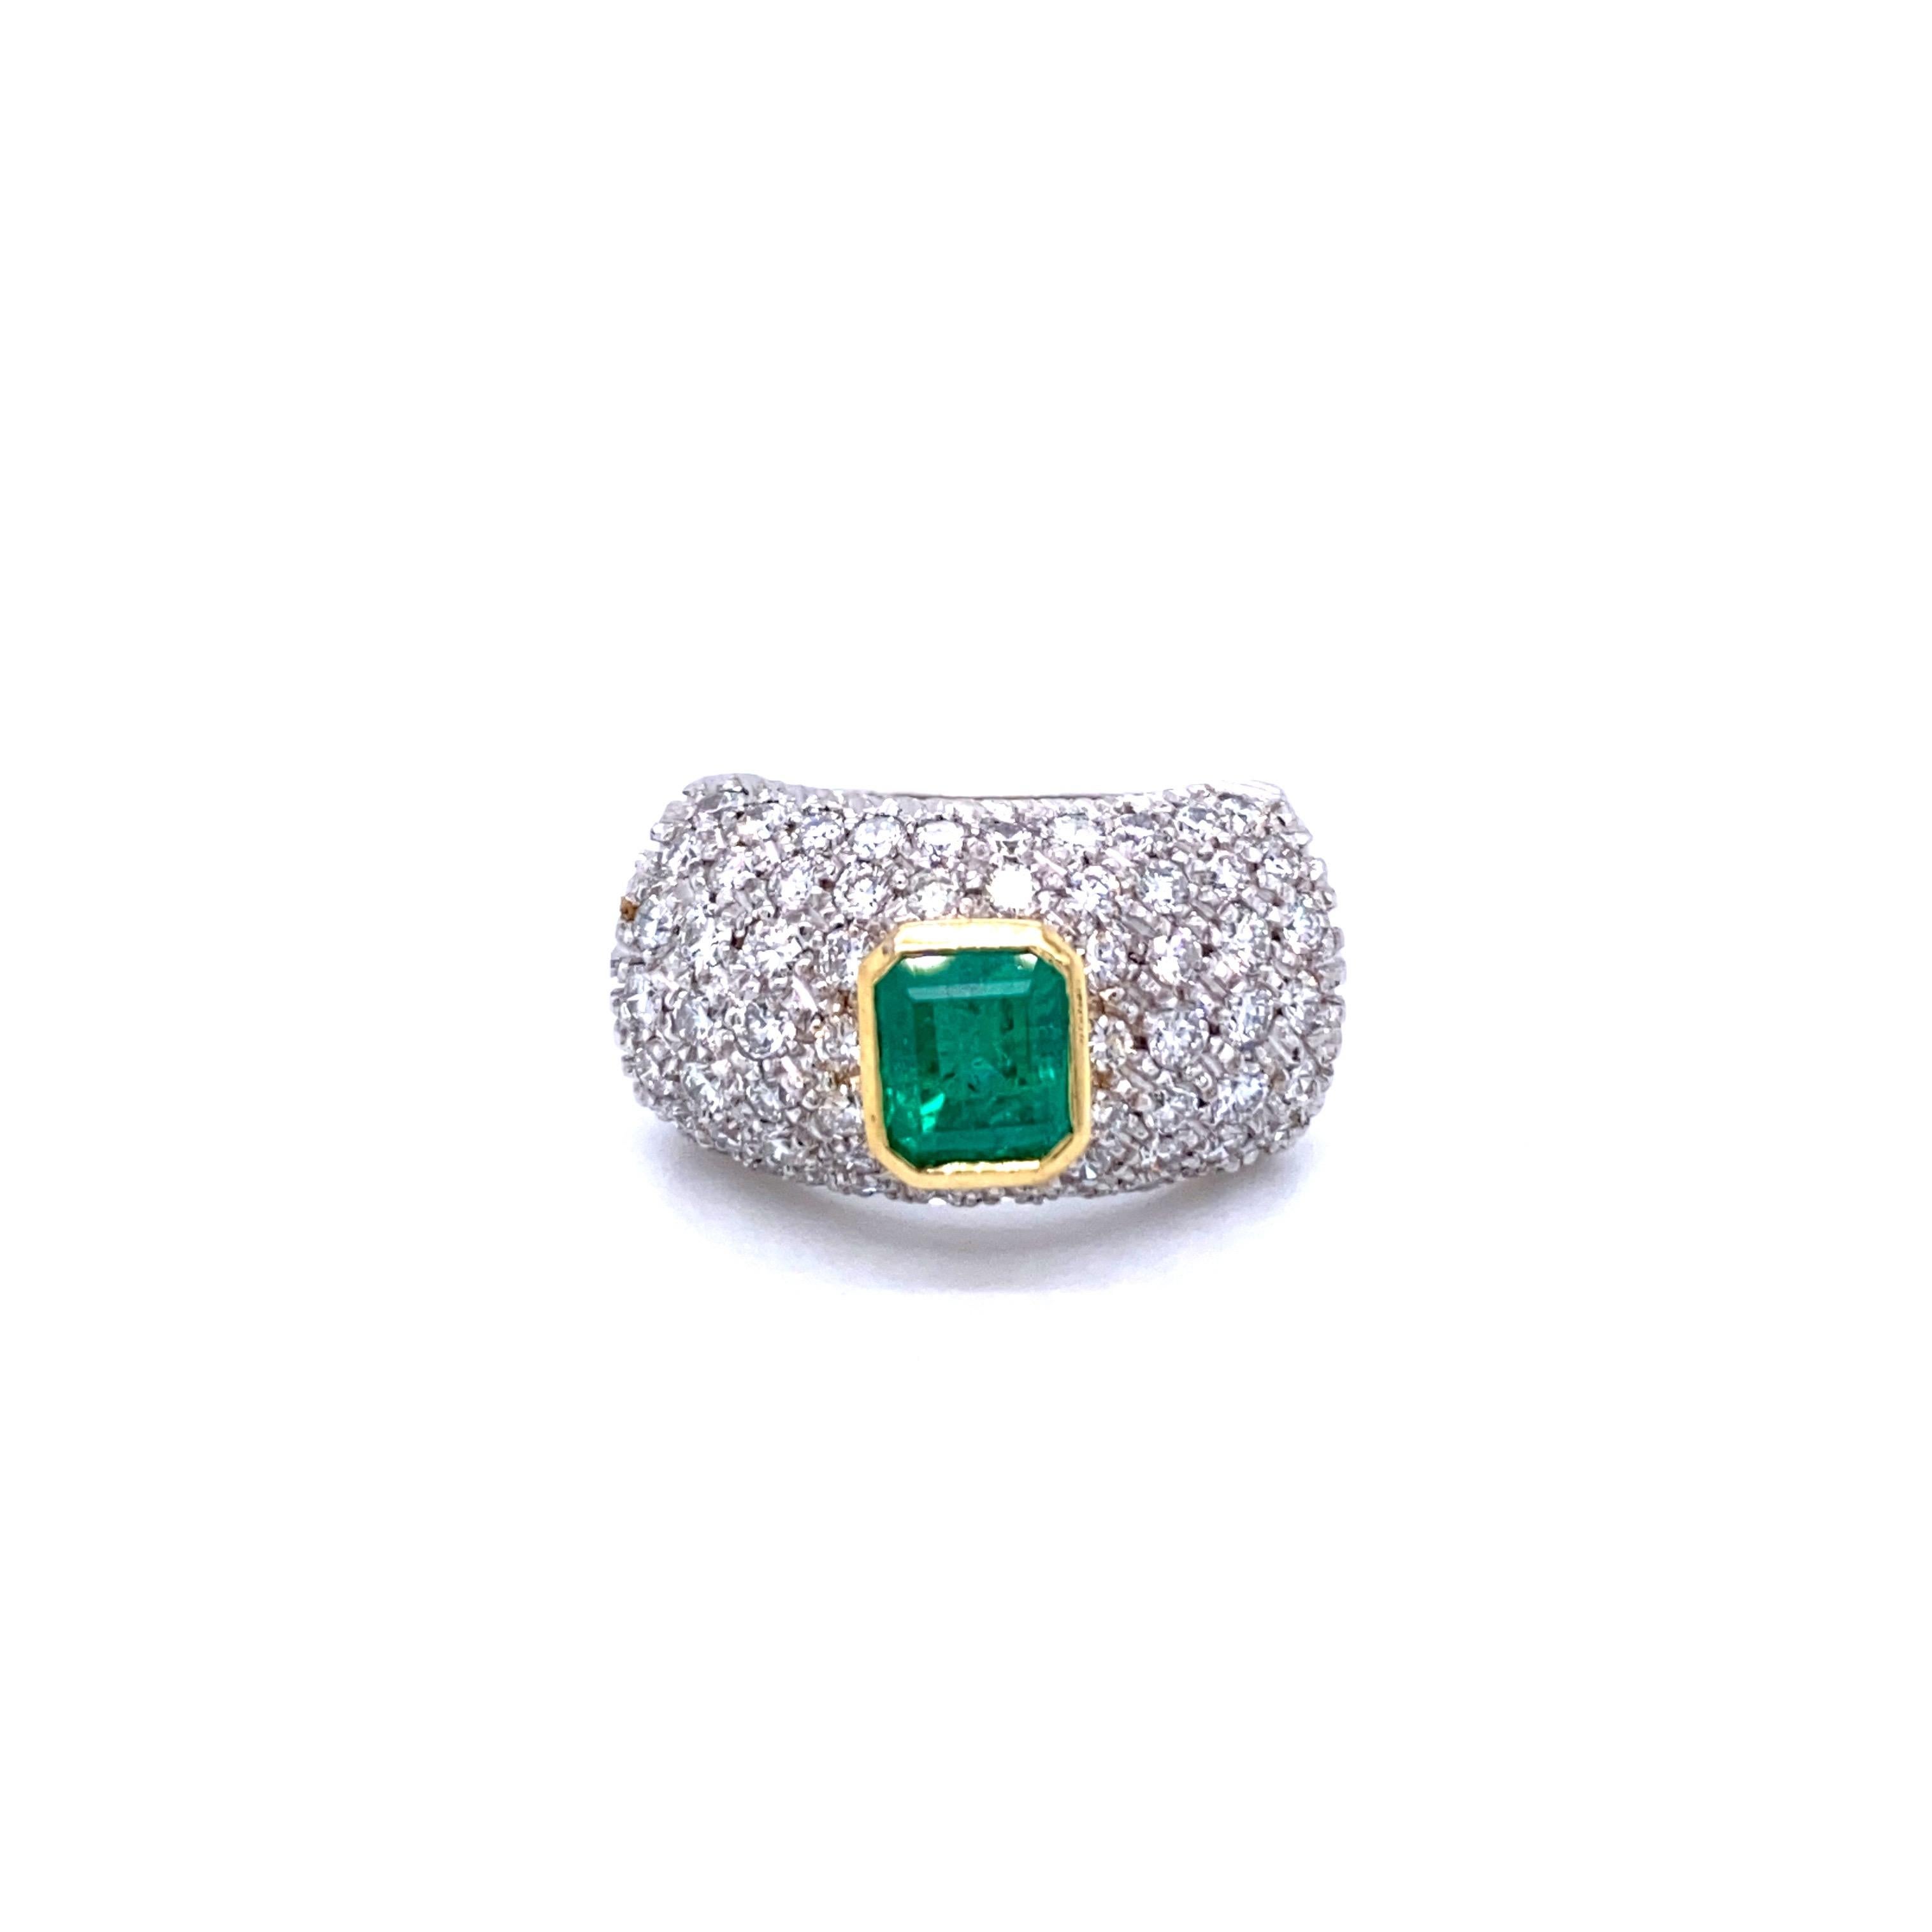 A beautiful emerald ring dated 1960, handmade in Italy in 18k white Gold showcasing a Natural Colombian emerald cut Emerald in the center weighing approx. 1.20 carat and surrounded by 2.00 carat of diamonds graded G color Vvs clarity pave